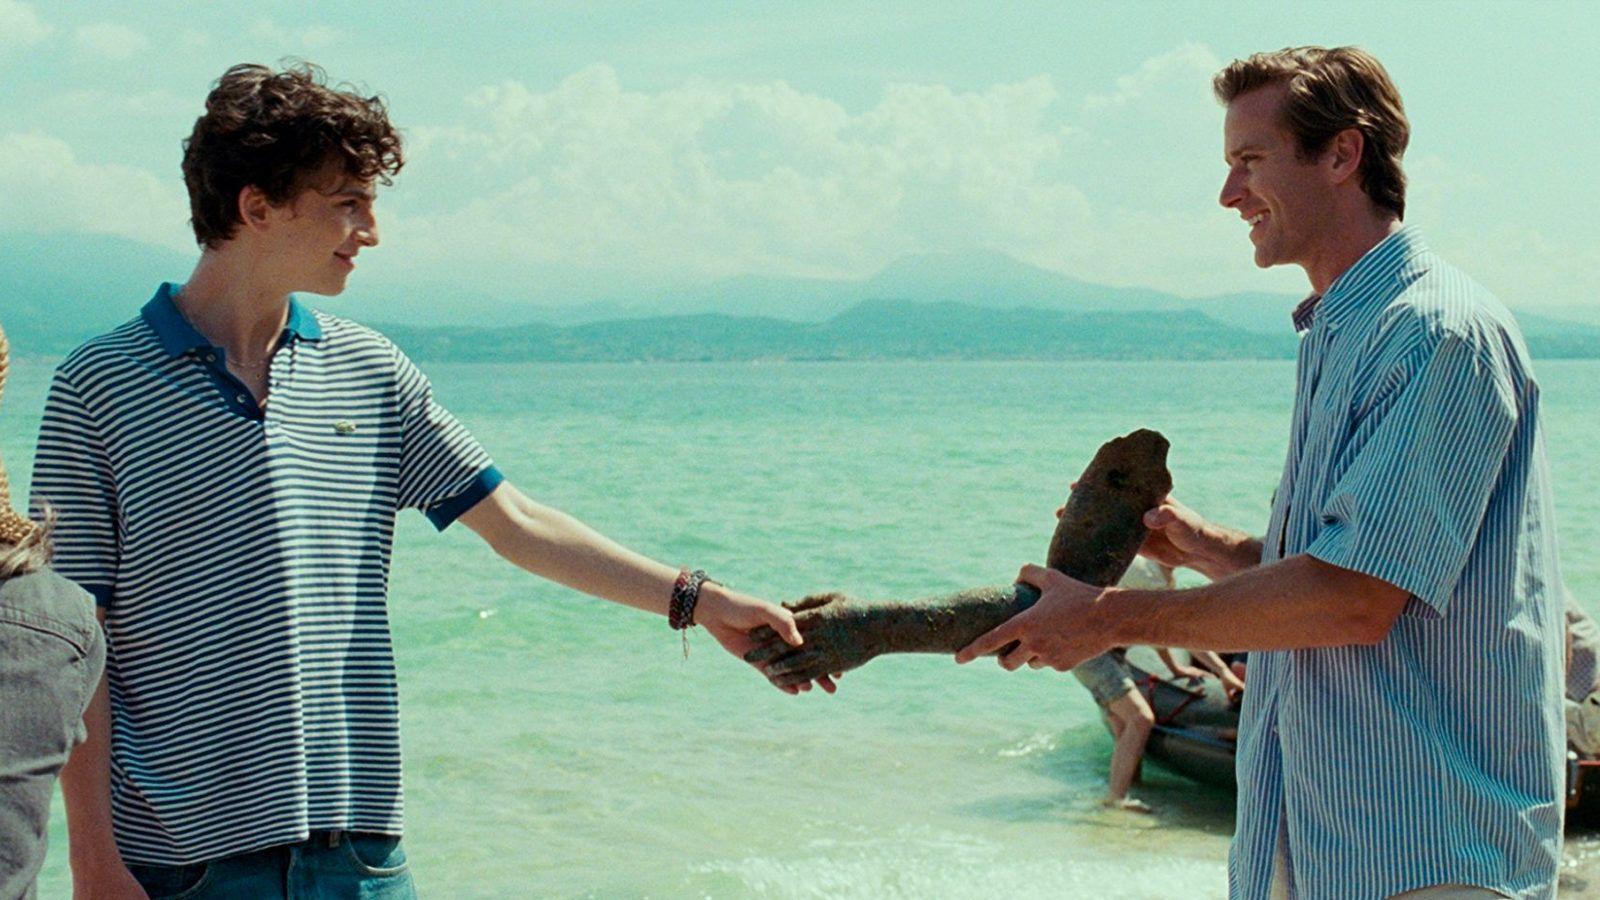 Call Me By Your Name Wallpapers Top Free Call Me By Your Name Backgrounds Wallpaperaccess